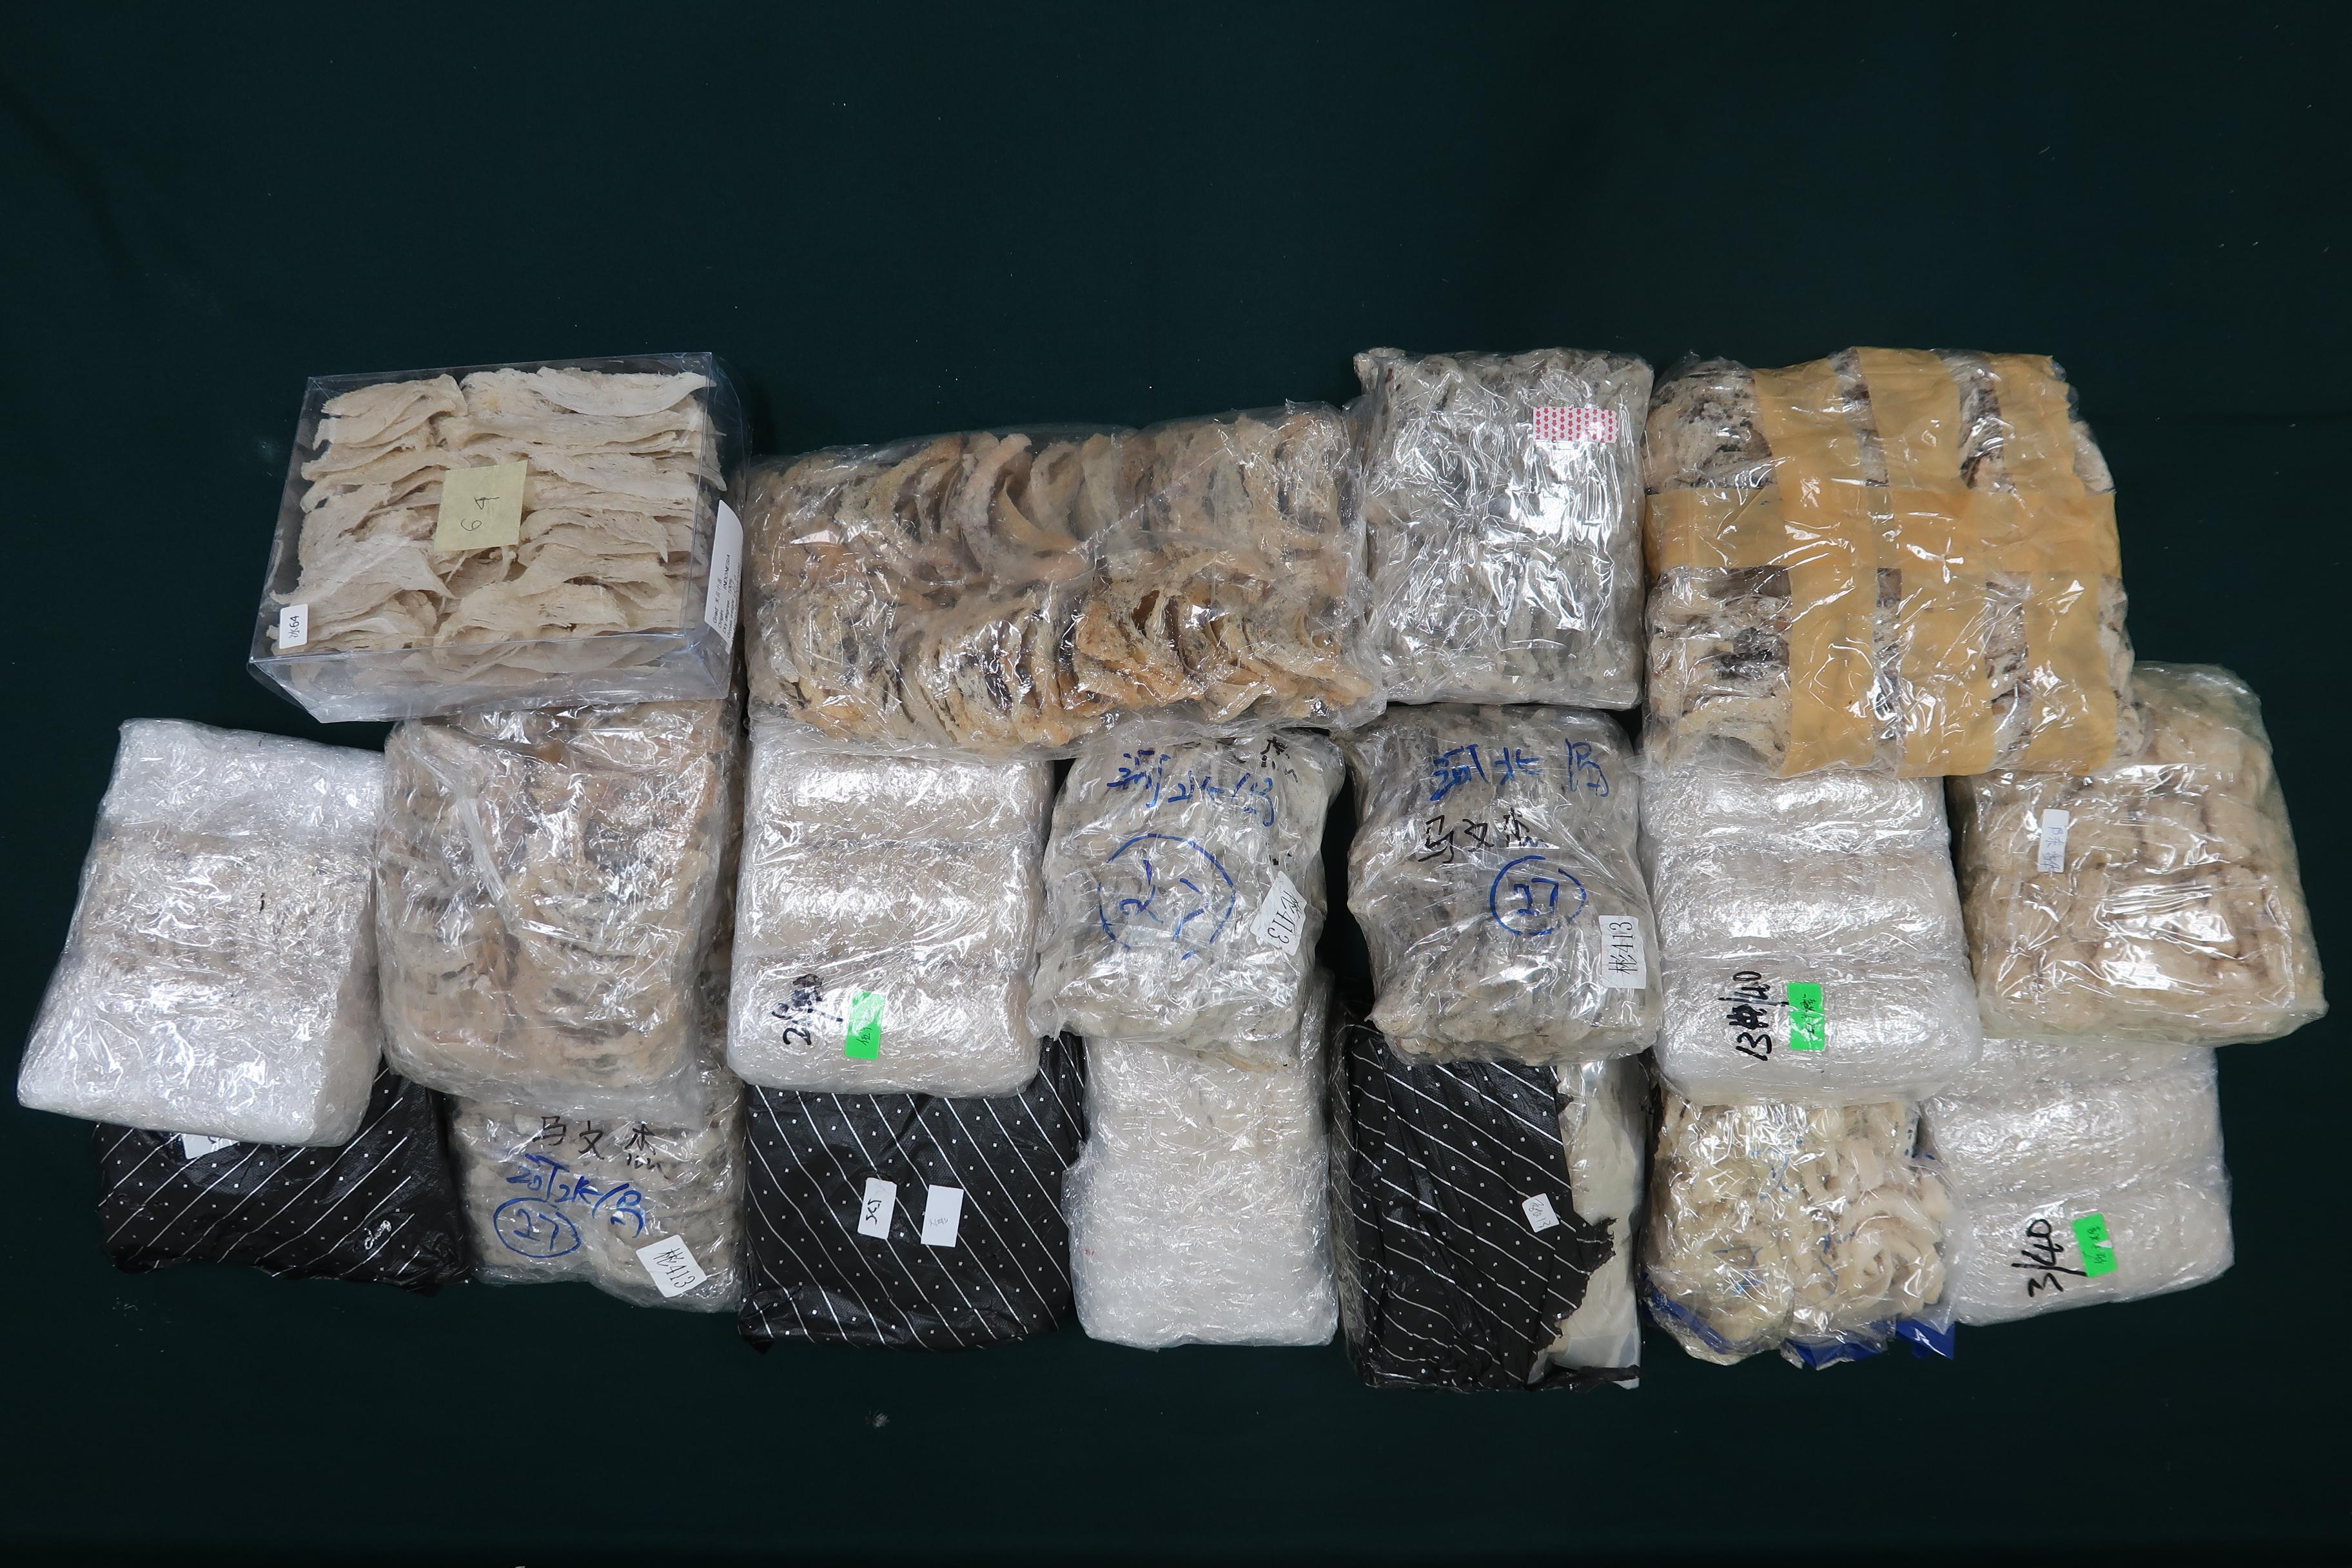 Hong Kong Customs yesterday (October 12) detected a suspected smuggling case involving a private car at the Heung Yuen Wai Control Point and seized about 12 kilograms of suspected smuggled bird's nests with an estimated market value of about $700,000. Photo shows the suspected smuggled bird's nests seized.

